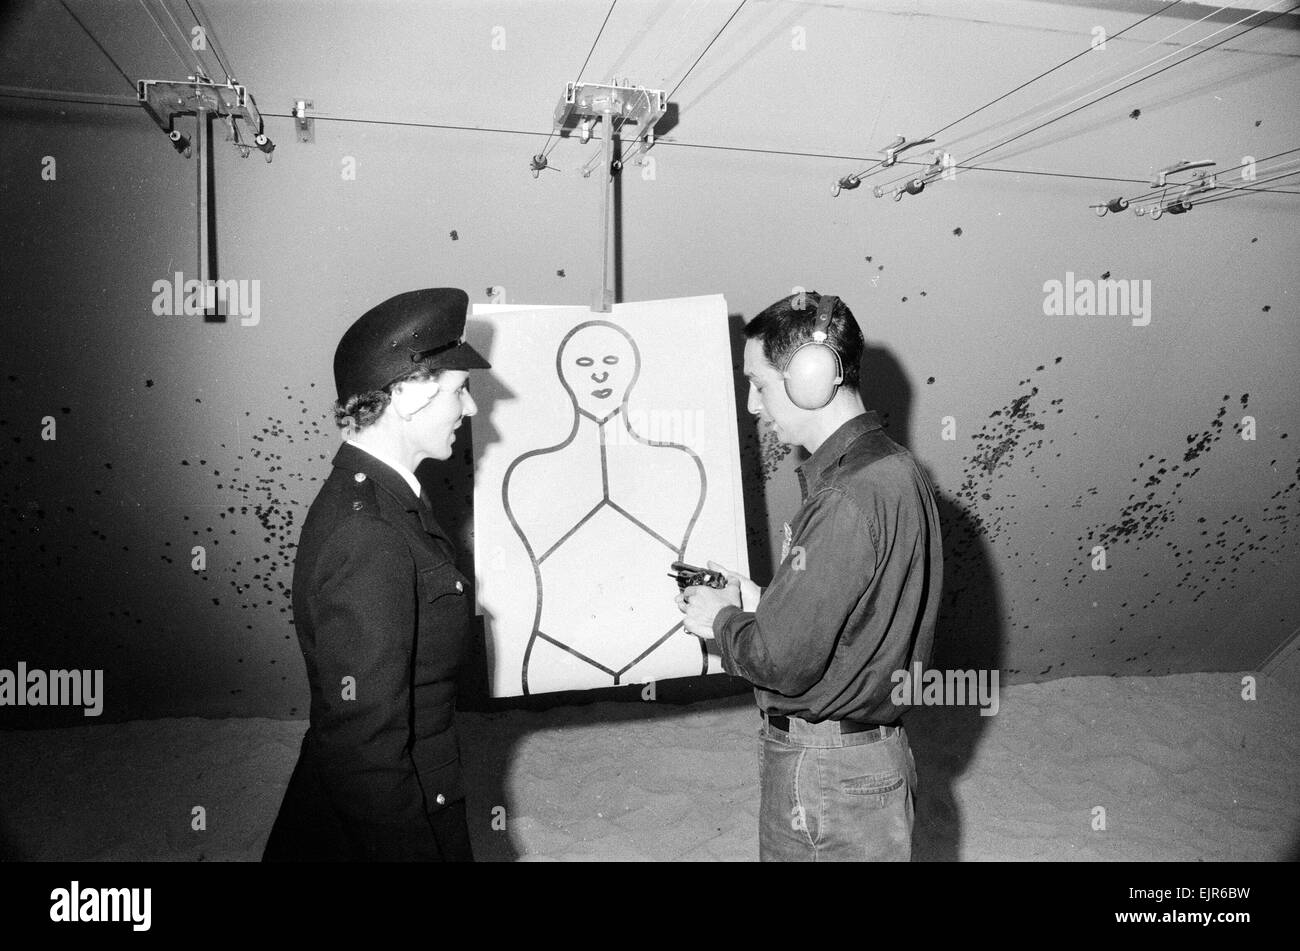 English police officers tour a firing range at a New York Police Department in America 2nd October 1964. Police woman is shown, by Instructor, how to hold a gun correctly *** Local Caption *** WatScan - - 05/01/2010 Stock Photo